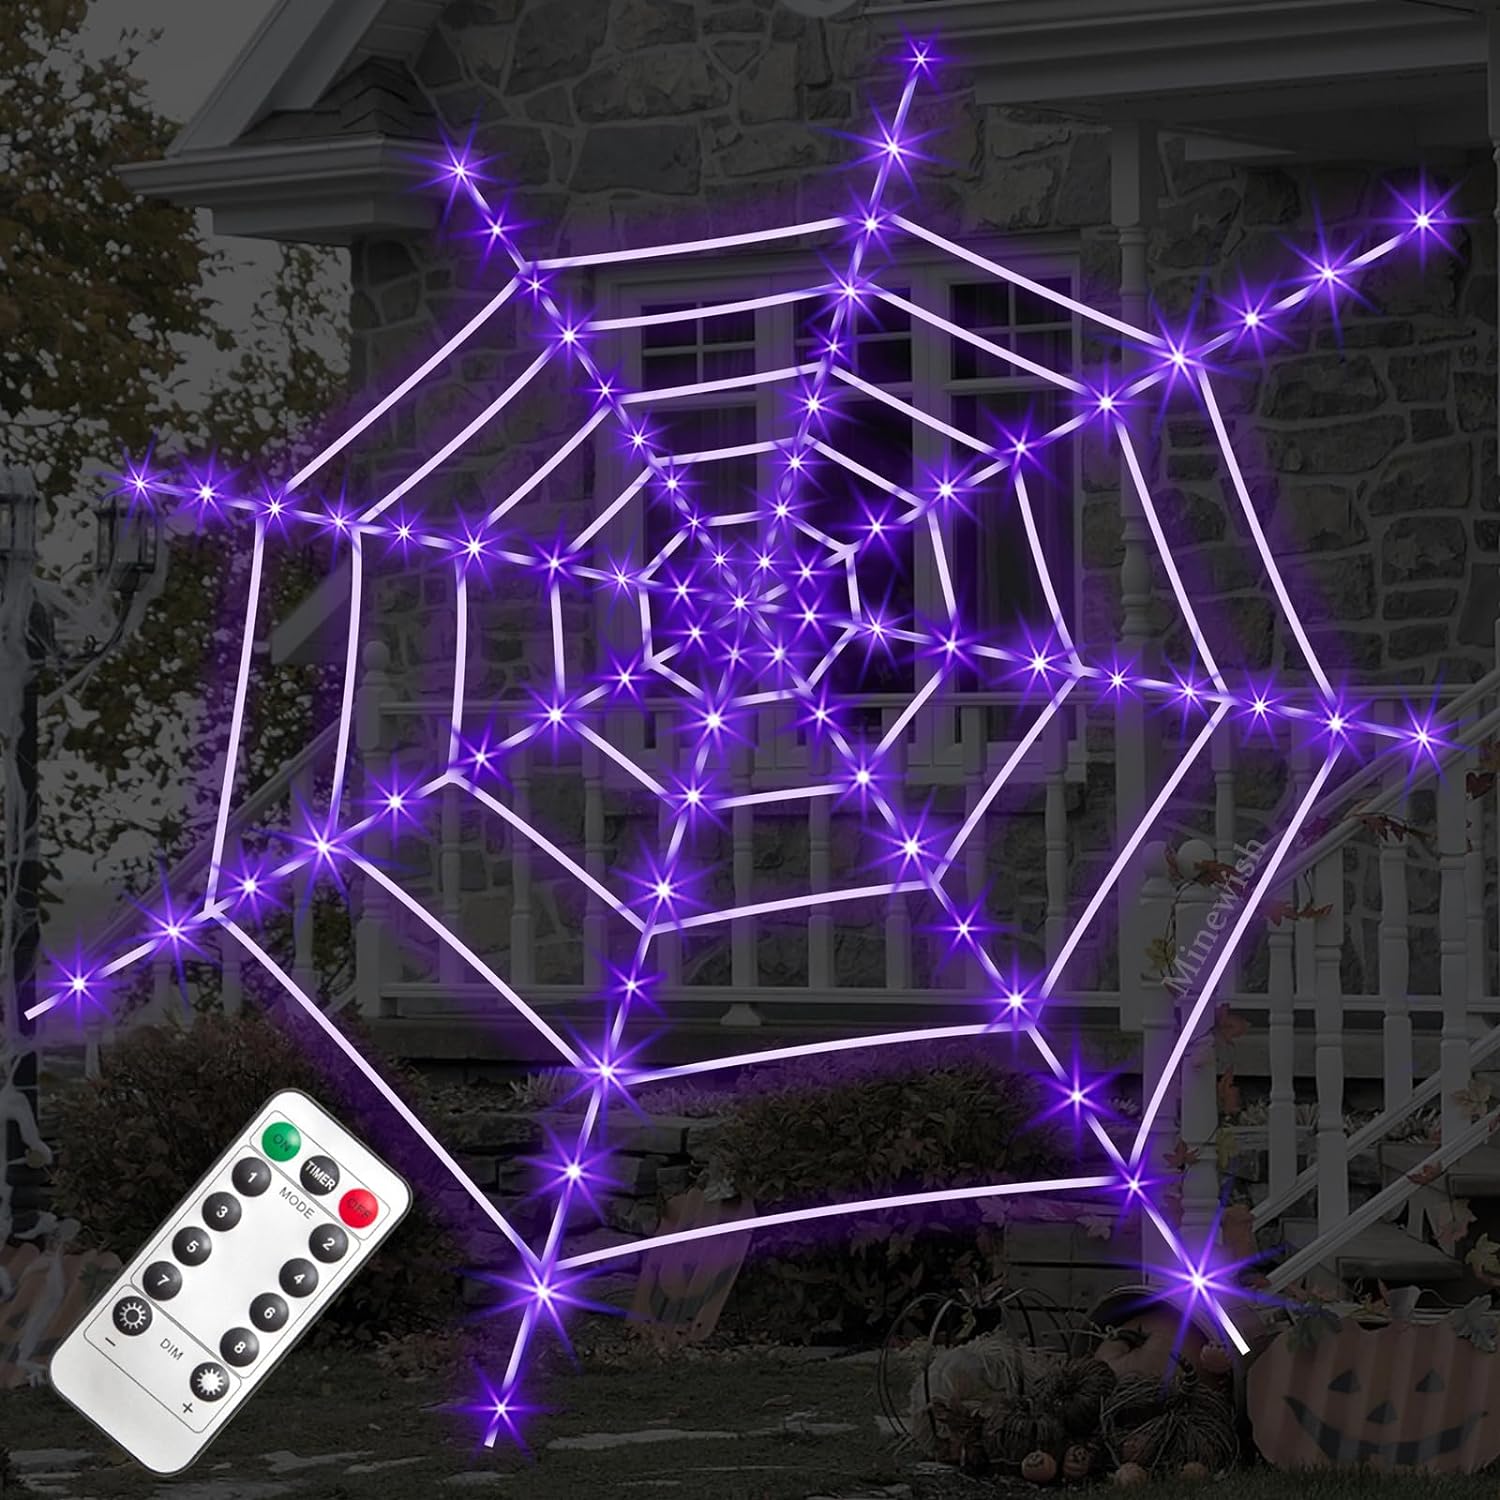 Halloween Decorations Spider Web Lights, 120 Purple LED Light Up 12 FT Giant Spiderweb Large Outdoor Lighted Decor Huge Cobweb String Lights Decorative for Party Indoor Outside House Porch Yard Garden